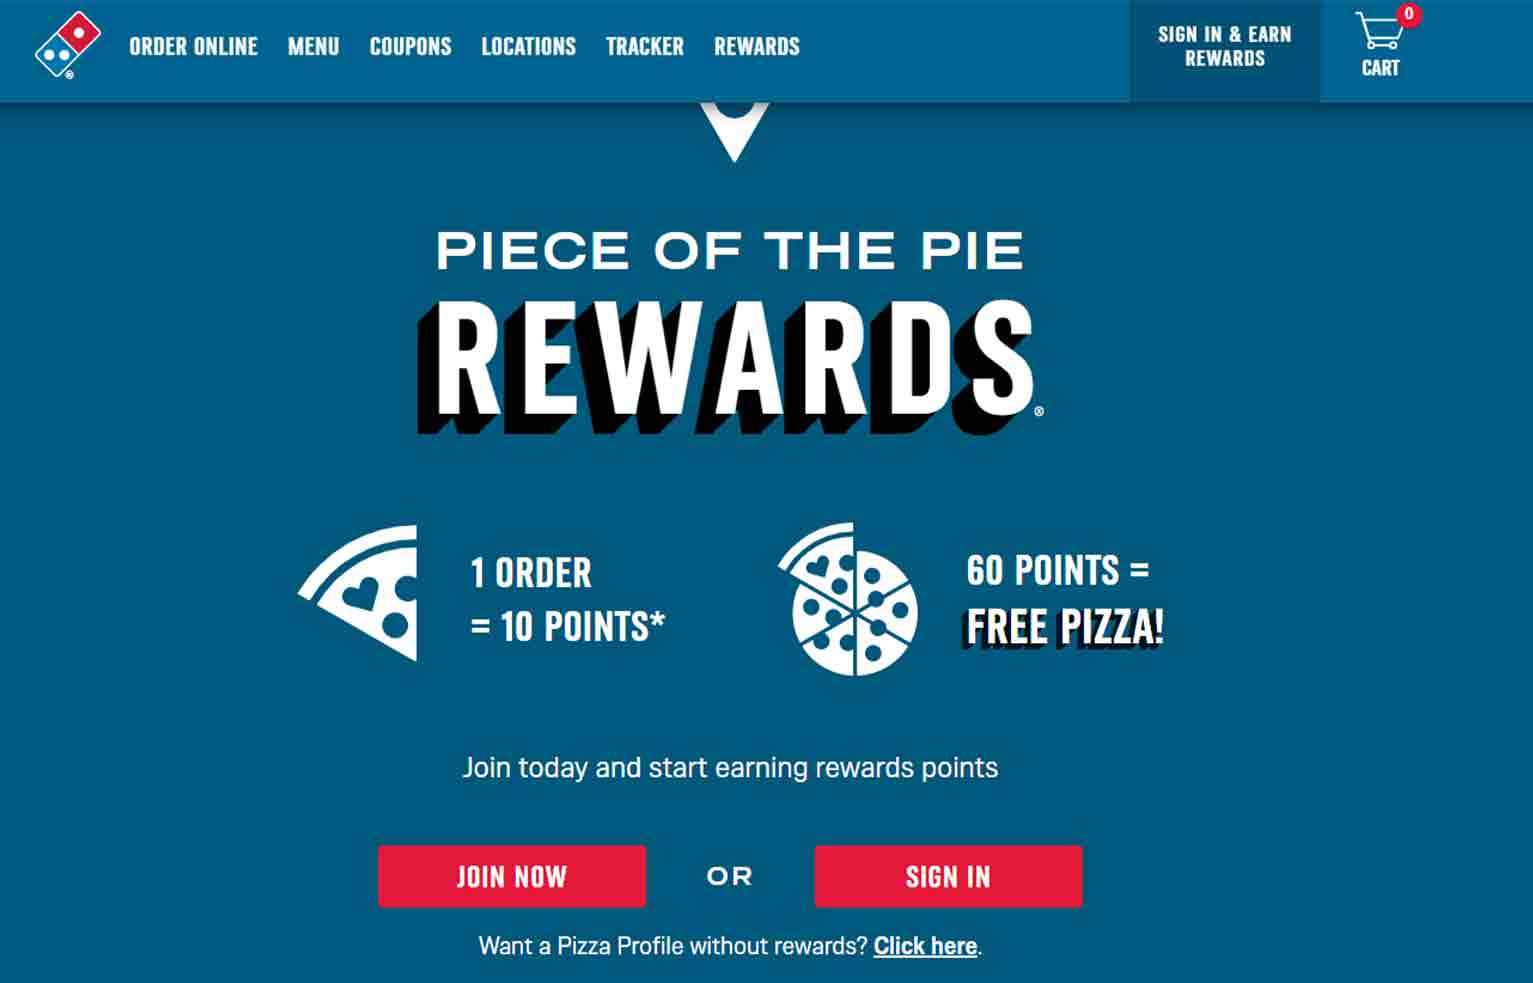 Also think about starting a points-for-dollars-spent loyalty program. Pizza chain Domino’s does a great job of this.